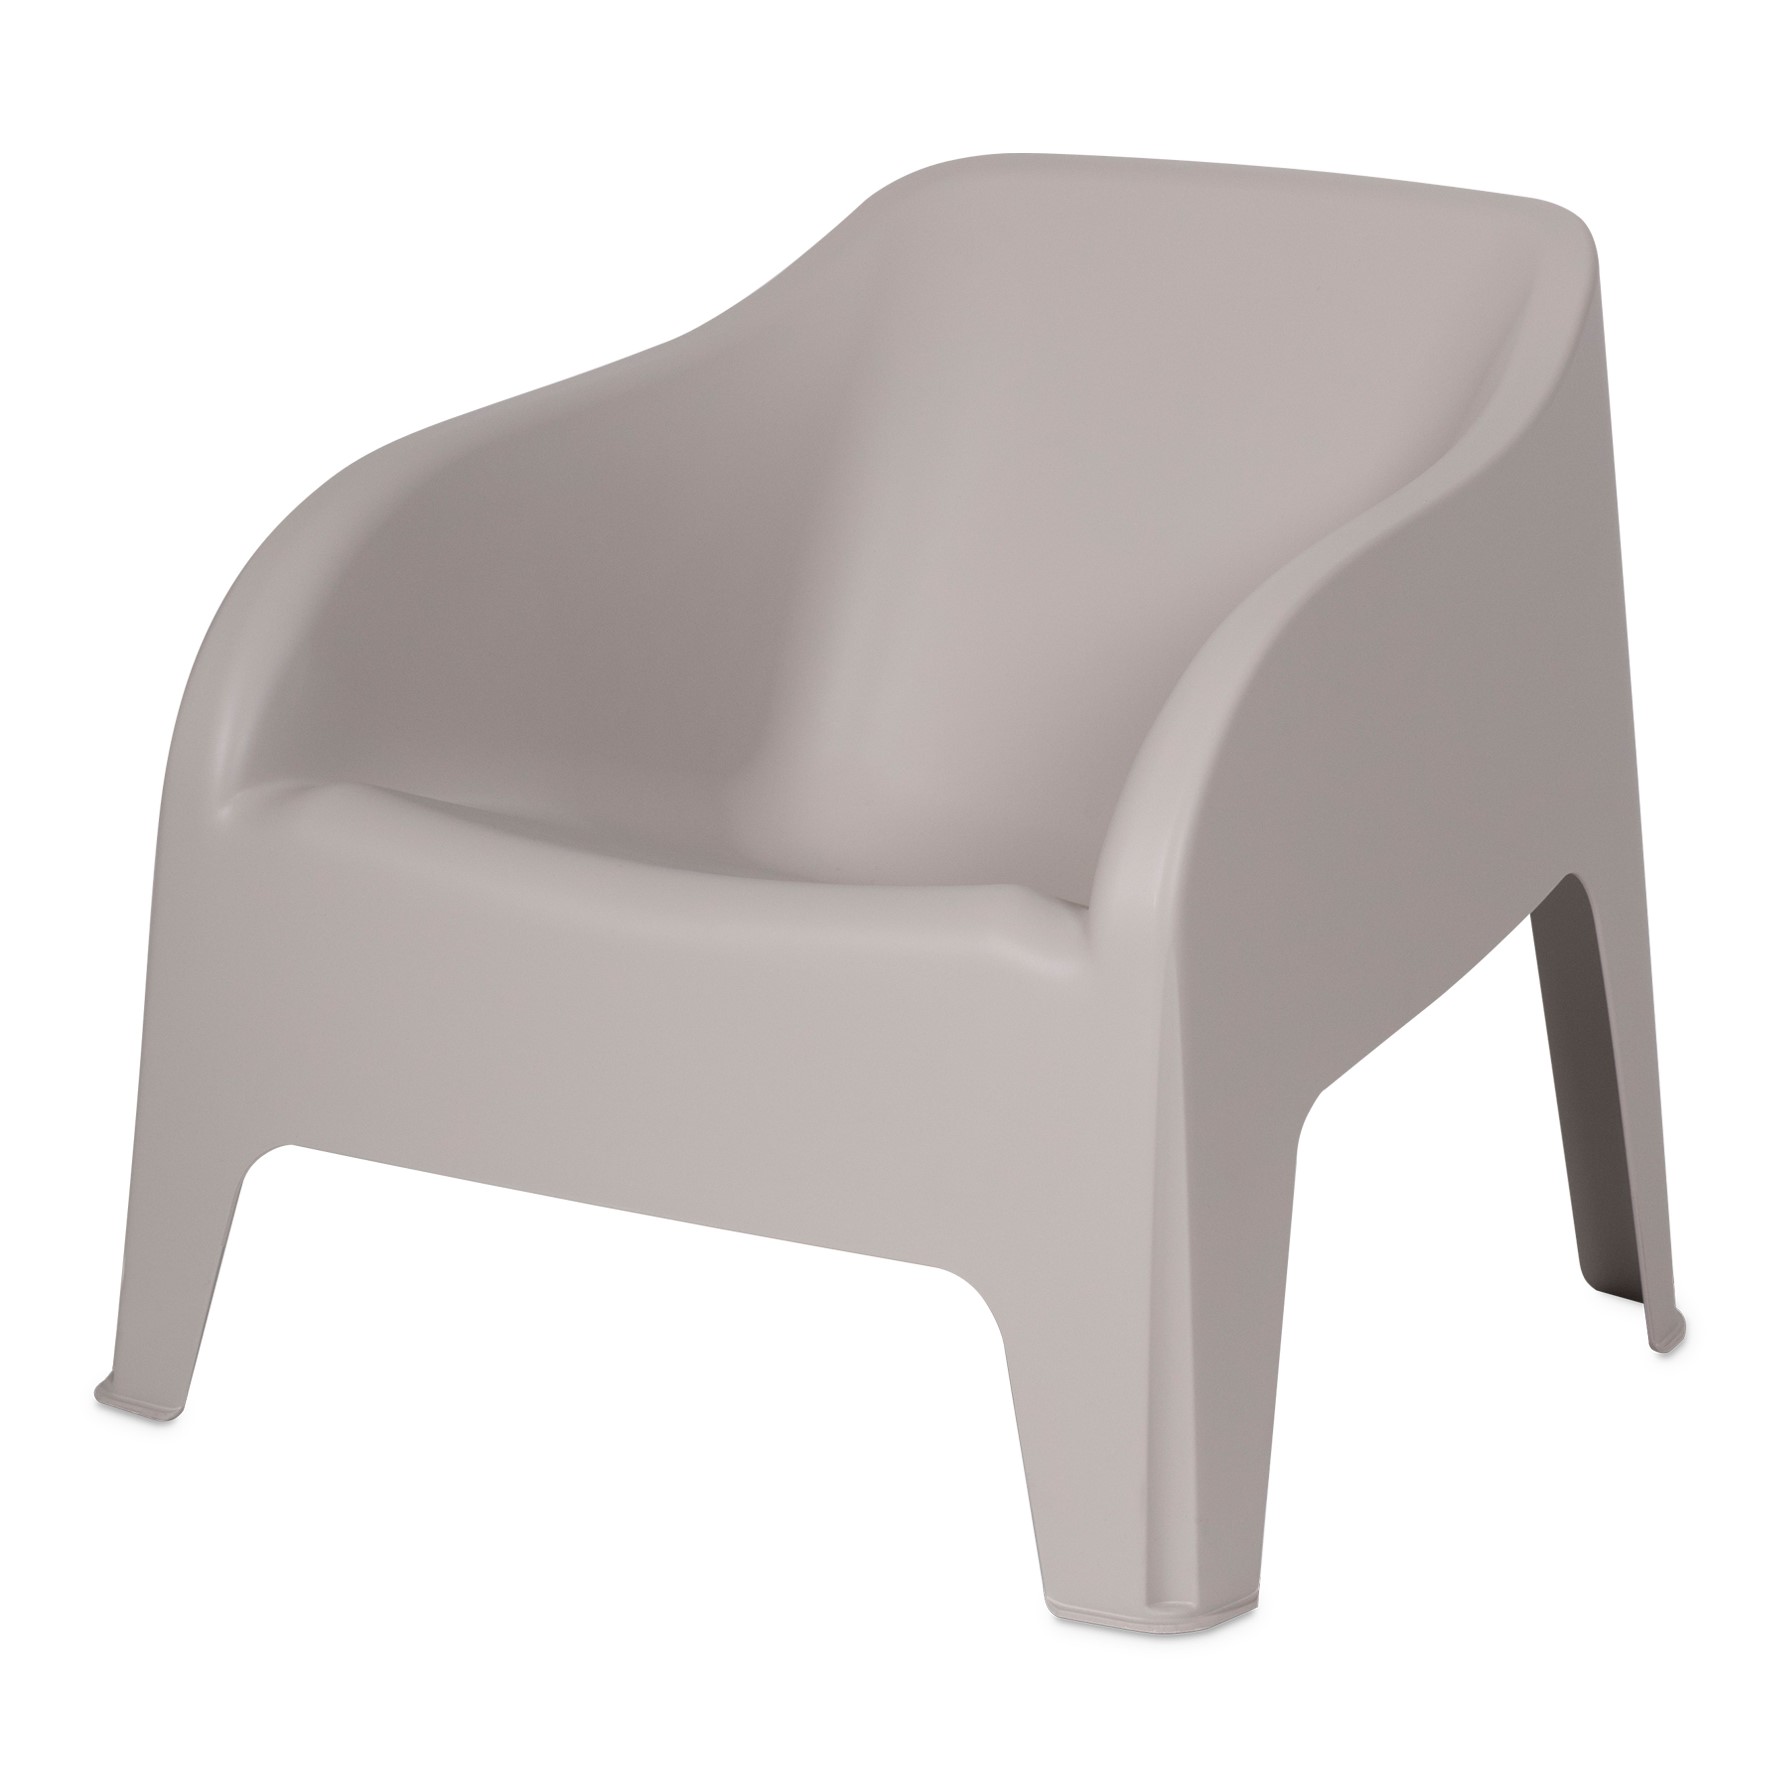 TOOMAX PETRA CHAIR 79Χ76.5Χ70CM TAUPE